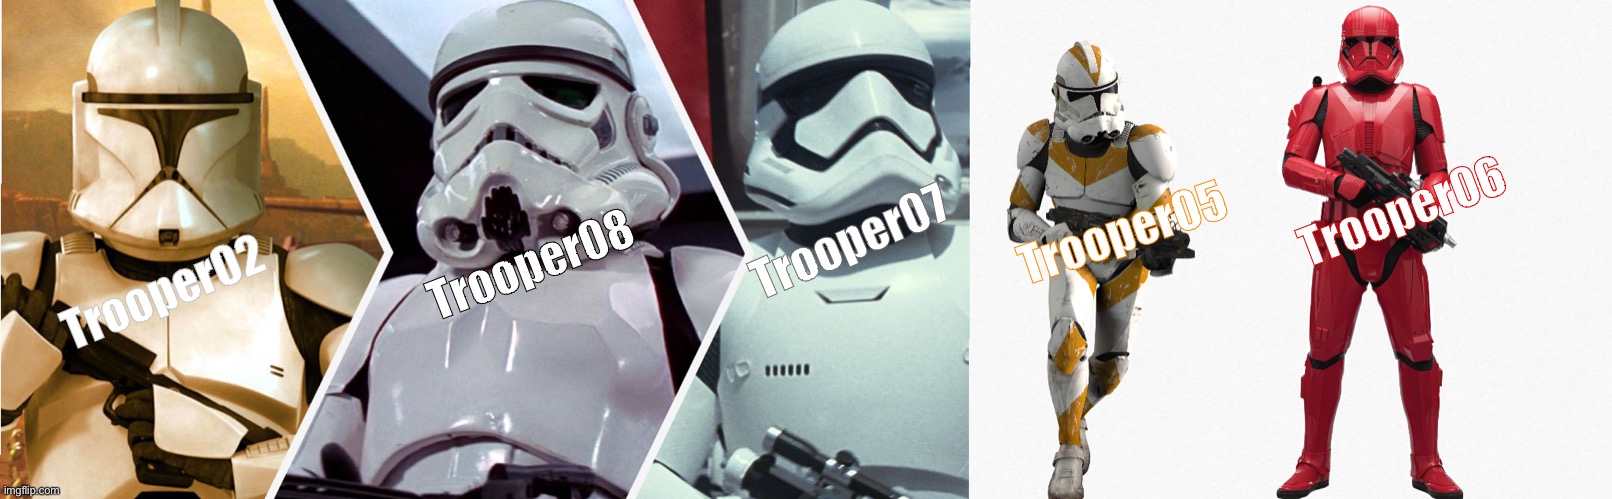 The rankings and looks of The Trooper Brothers | Trooper06; Trooper05; Trooper07; Trooper08; Trooper02 | image tagged in trooper brothers,ranks,trooper06,trooper05,trooper02,trooper07 | made w/ Imgflip meme maker